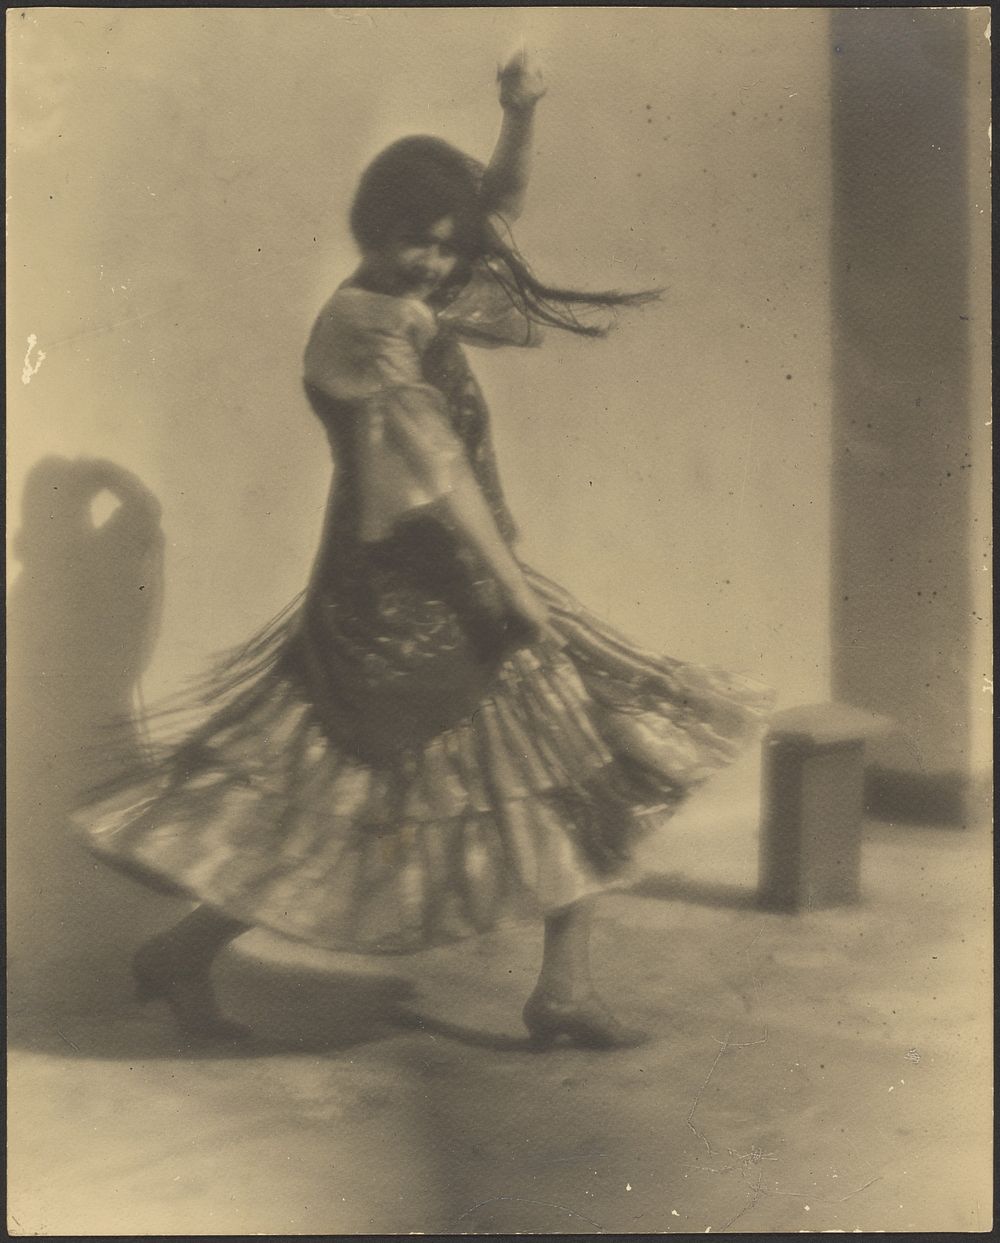 Woman Dancing in Spanish Outfit by Louis Fleckenstein